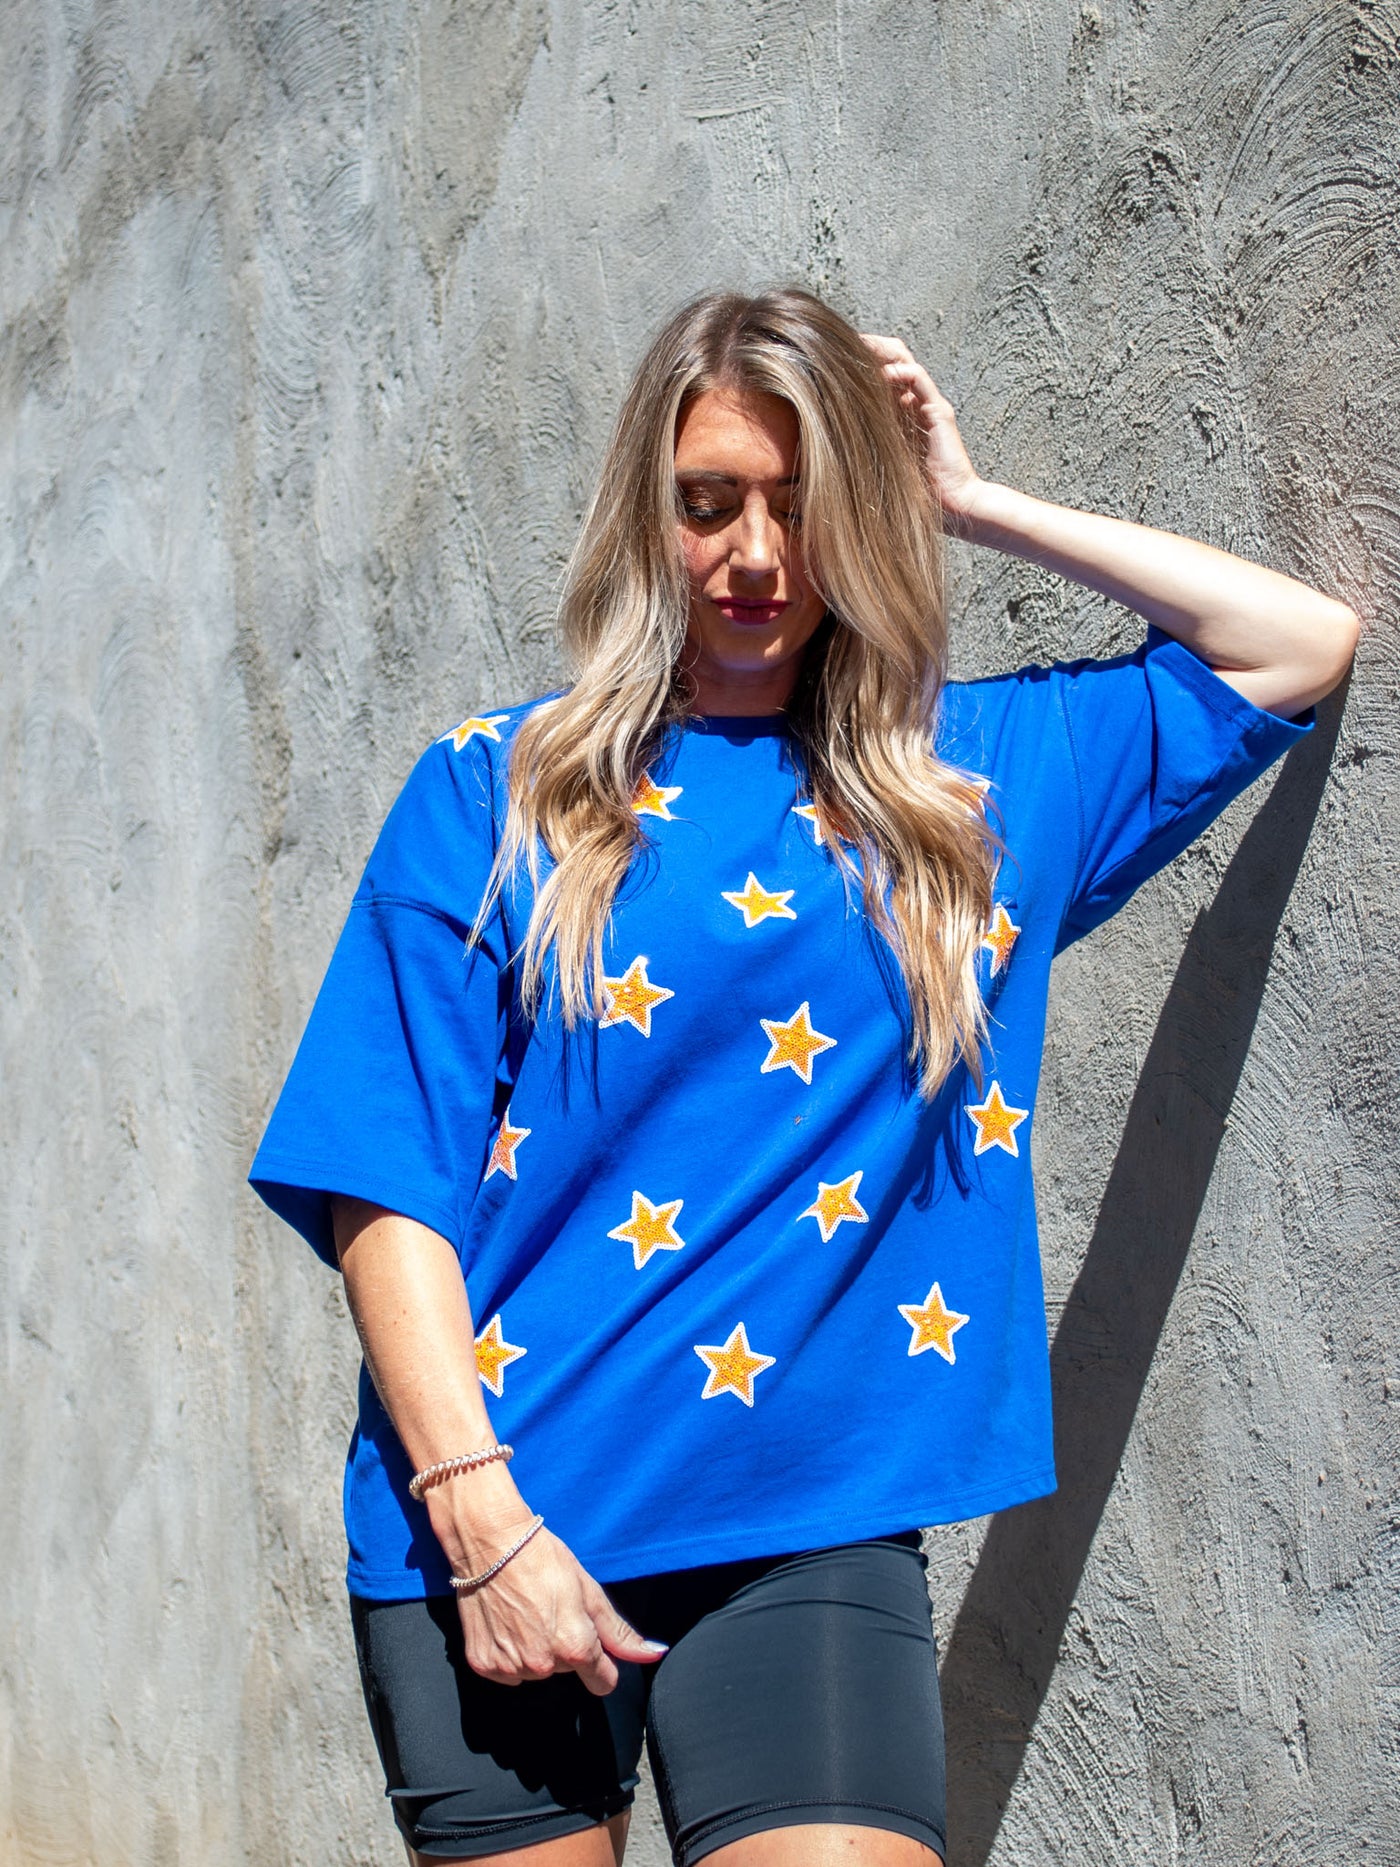 A model wearing an oversize blue tee with gold sequin stars on it. She has it paired with black biker shorts.